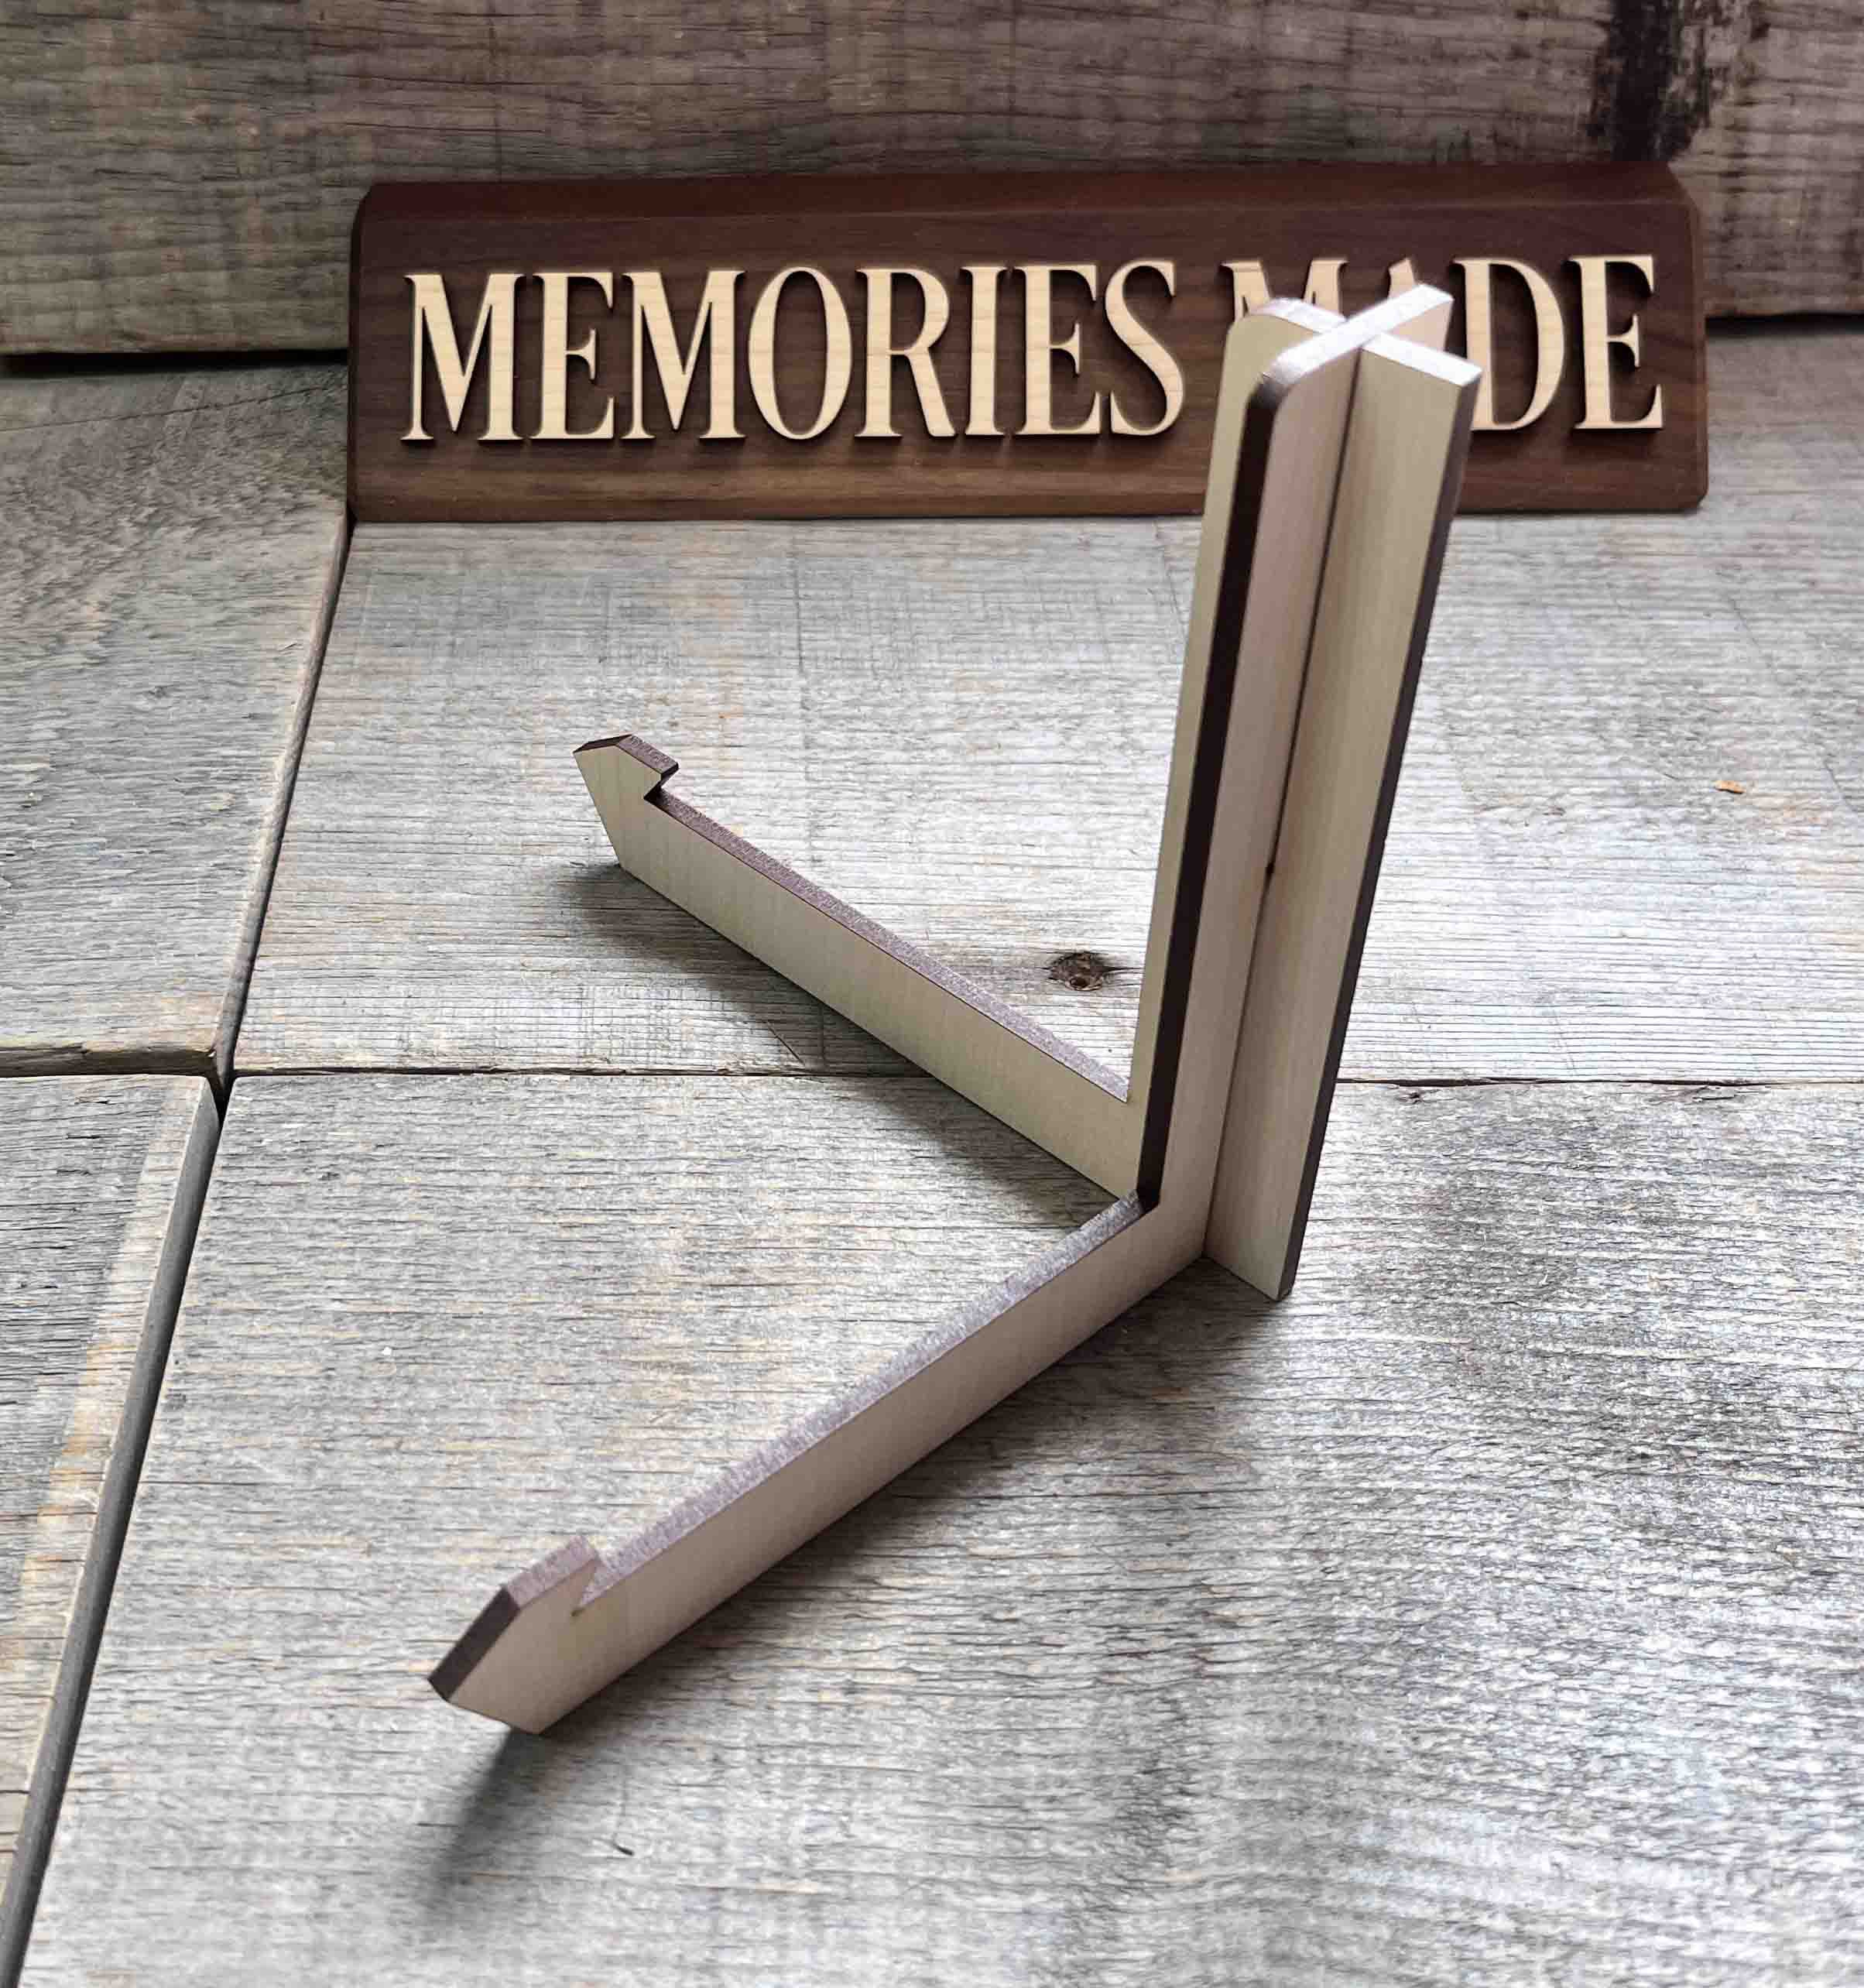 Display Stand for cutting boards, plaques and signs..